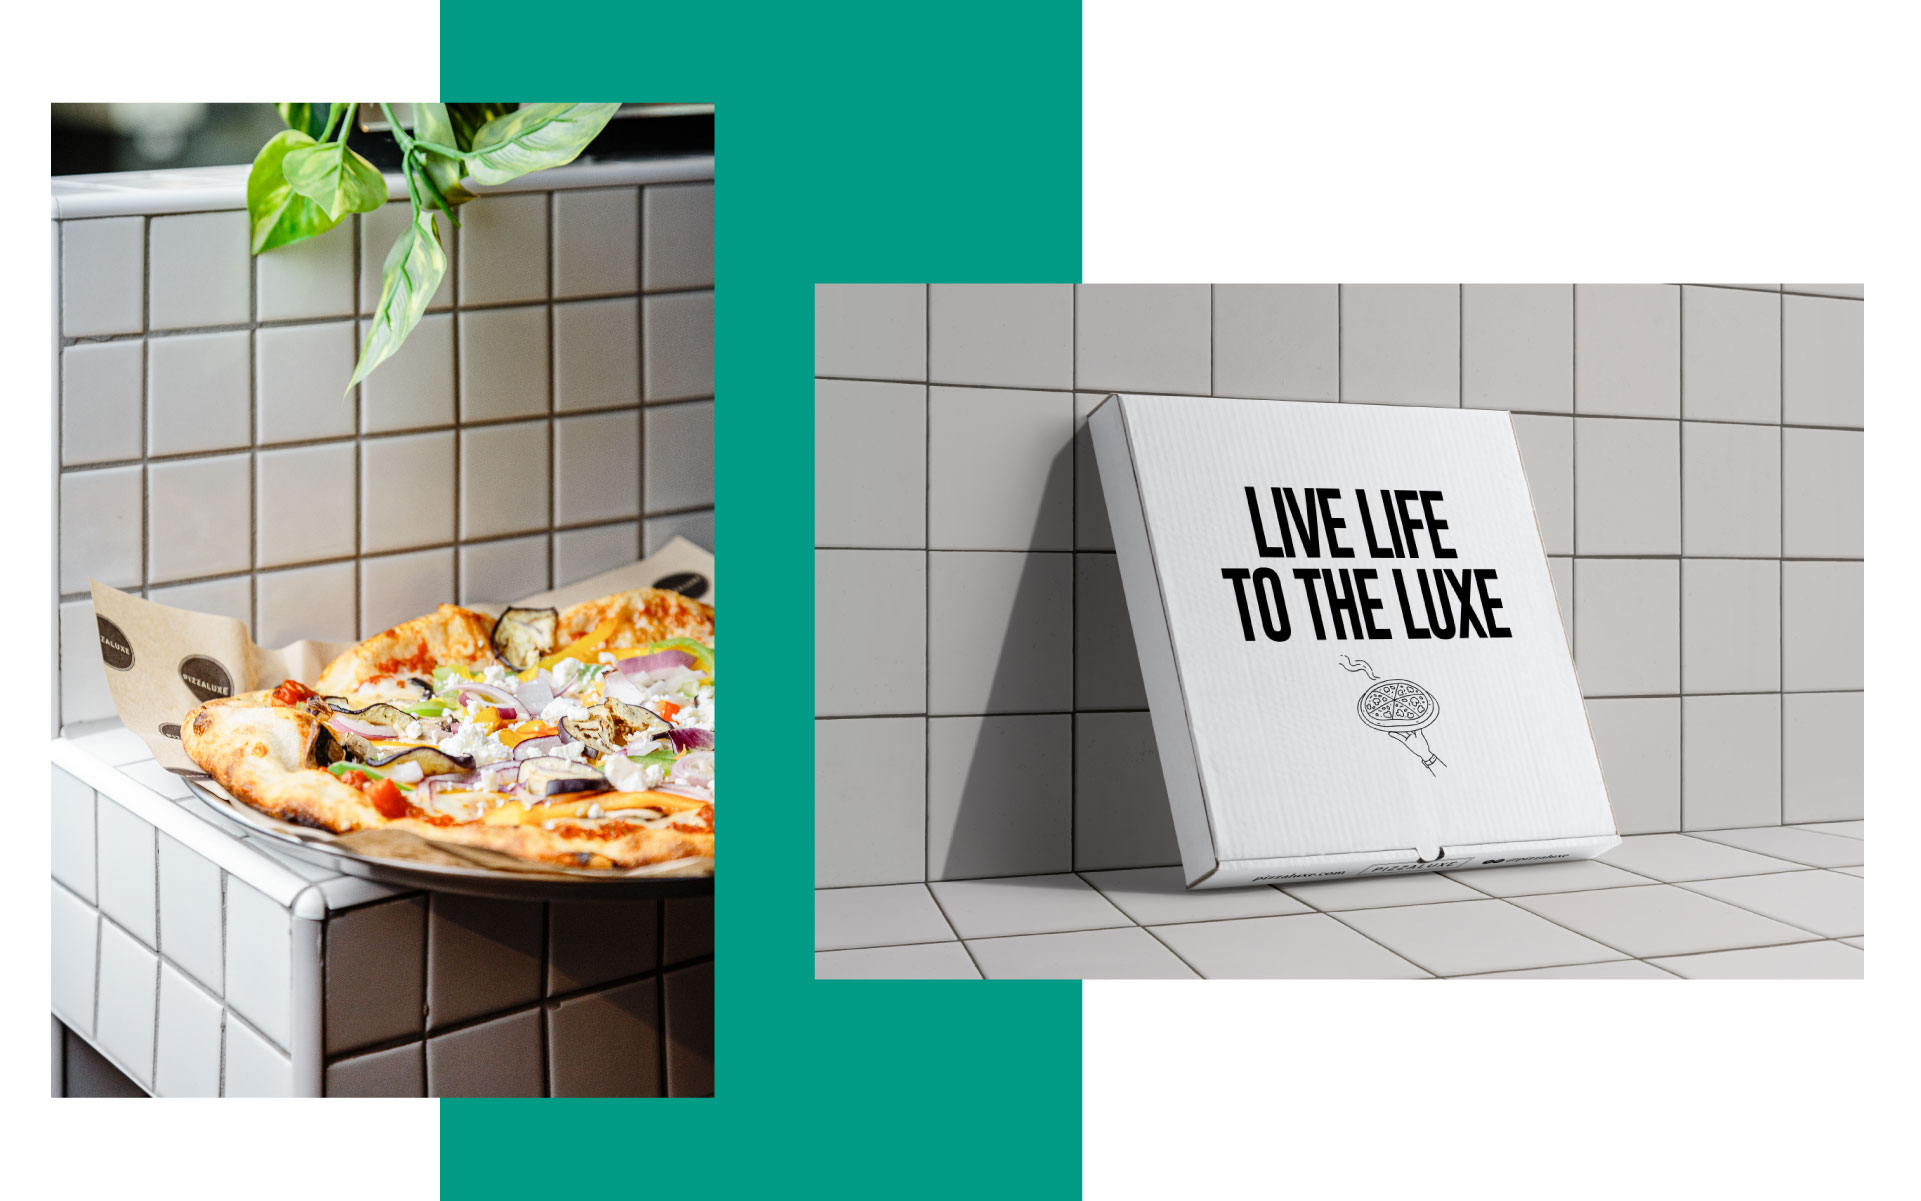 Saved-By-Robots-Graphic-Design-Glasgow-London-PizzaLuxe-Box